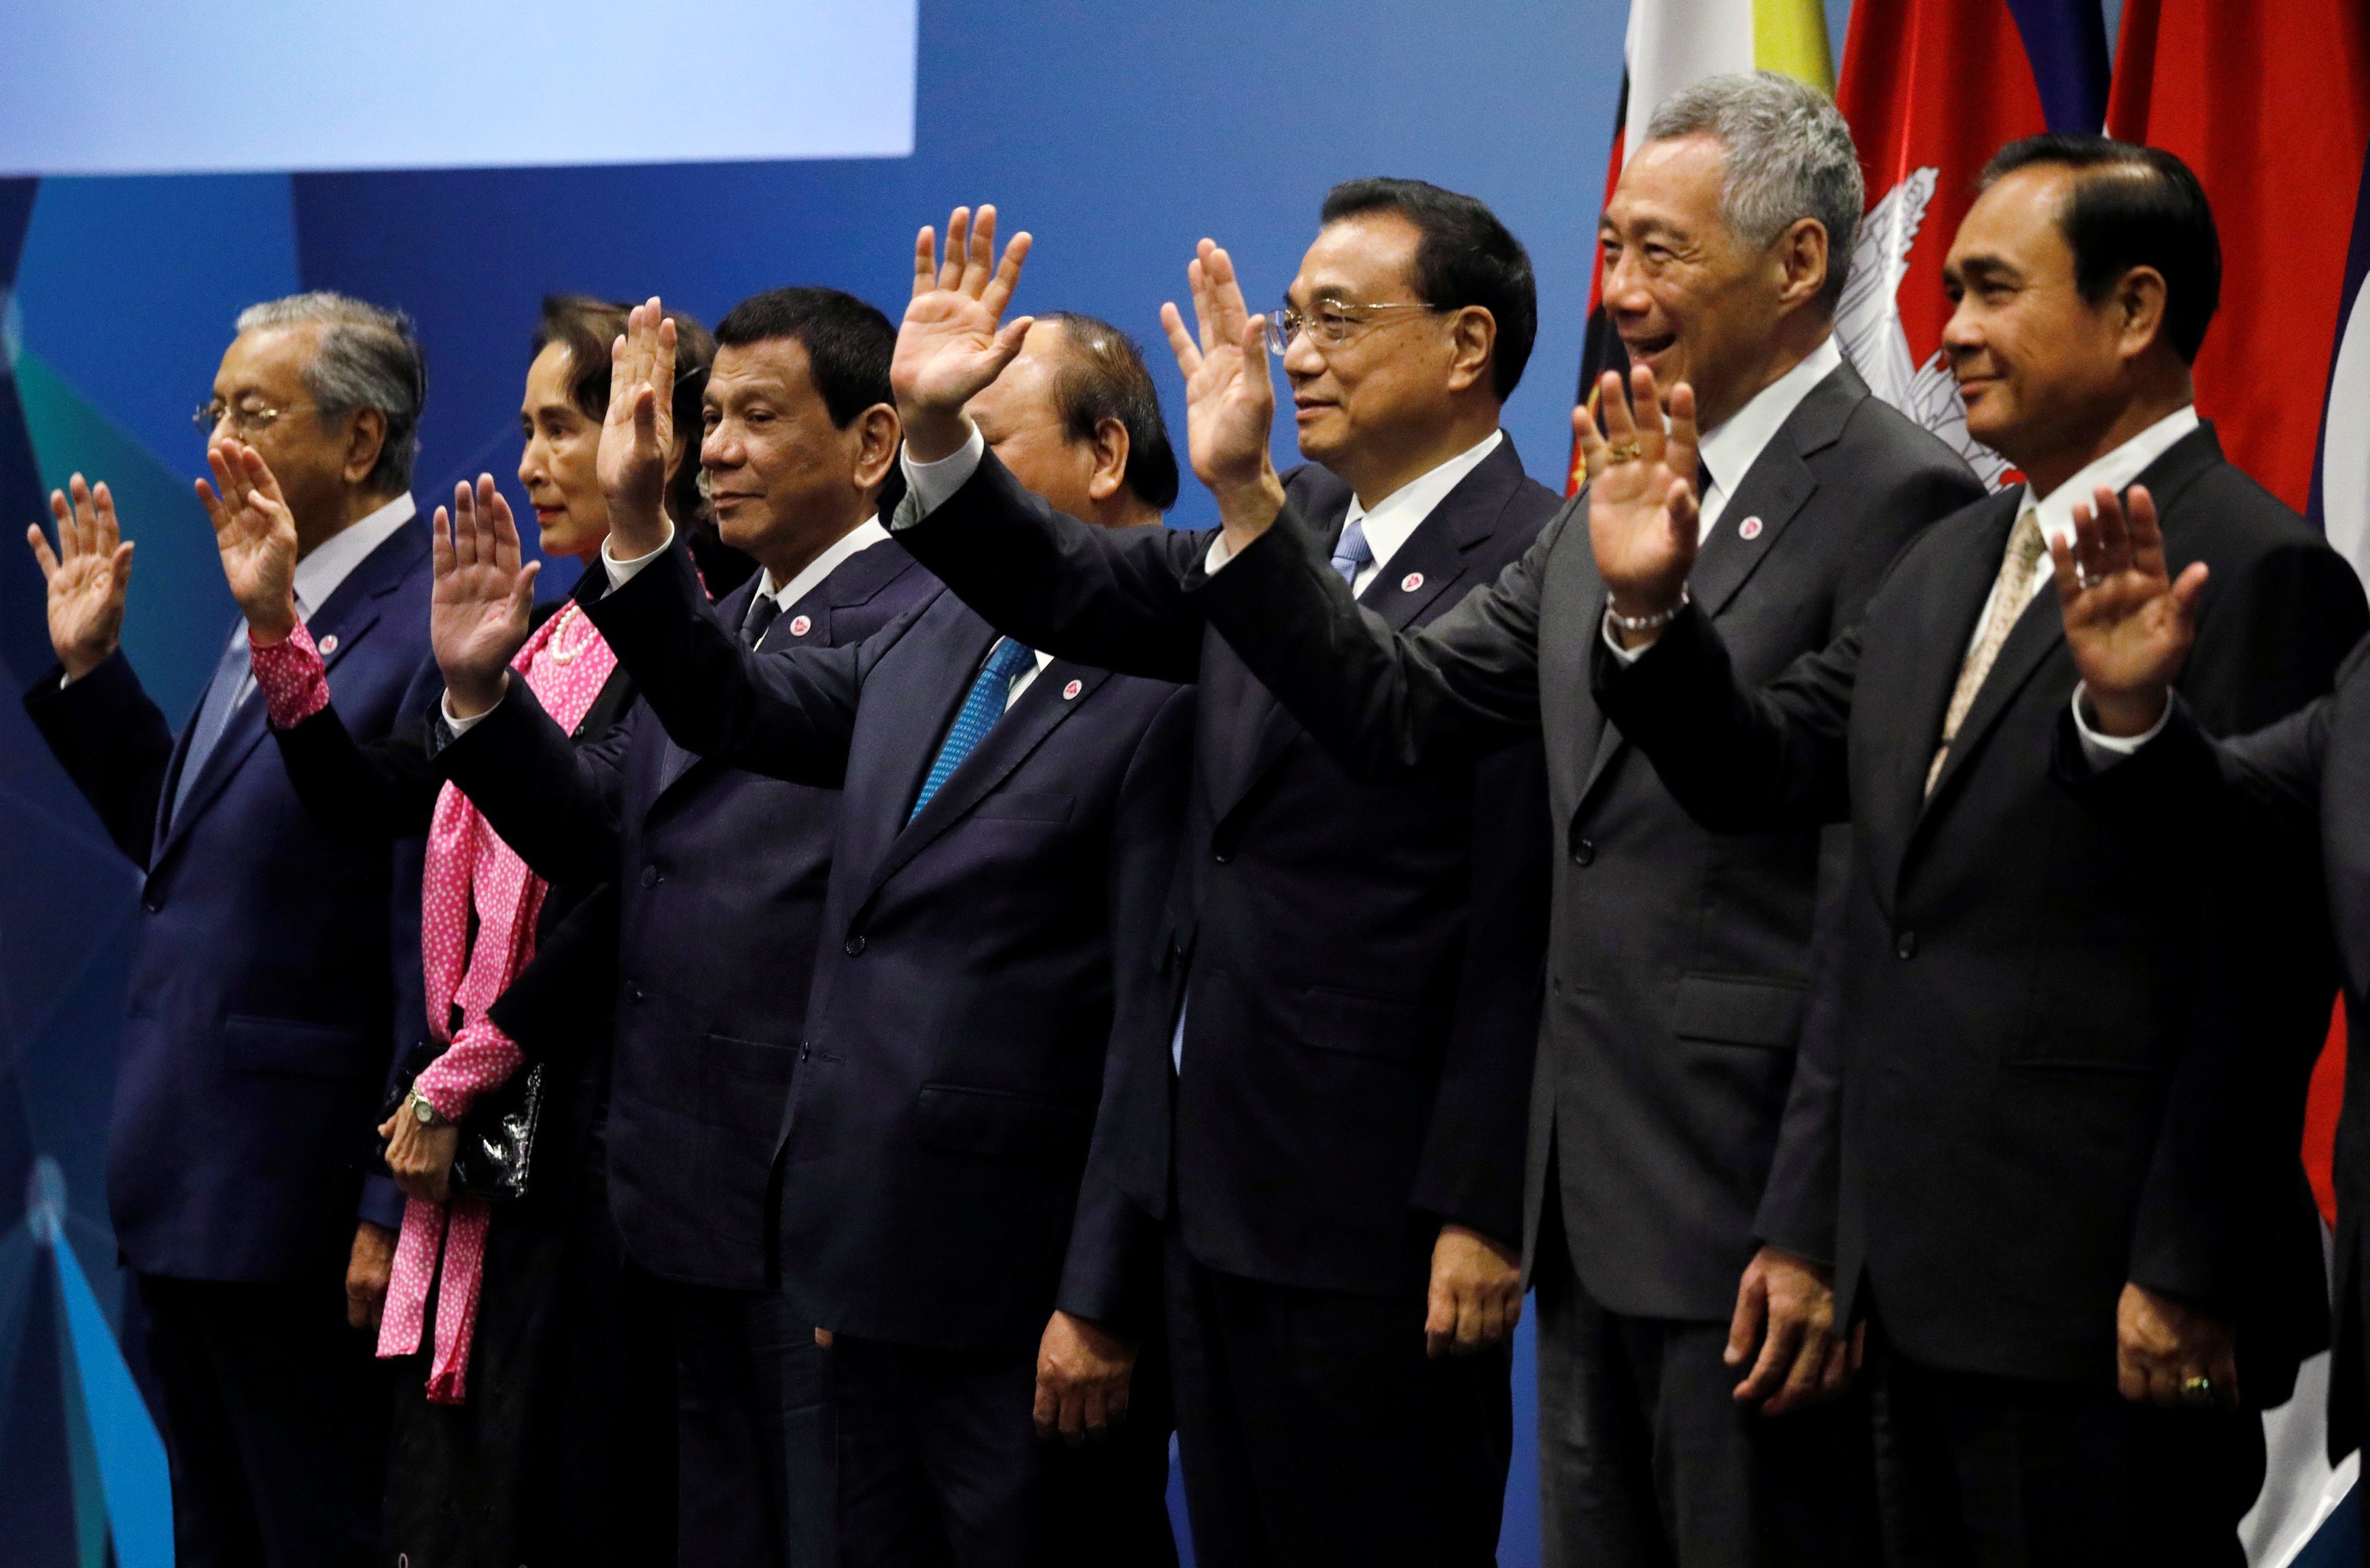 China’s Premier Li Keqiang (third from right) poses with Association of Southeast Asian Nation leaders at the Asean-China Summit in Singapore on November 14. Li signed an upgraded version of the China-Singapore free-trade agreement during his visit. Photo: Reuters